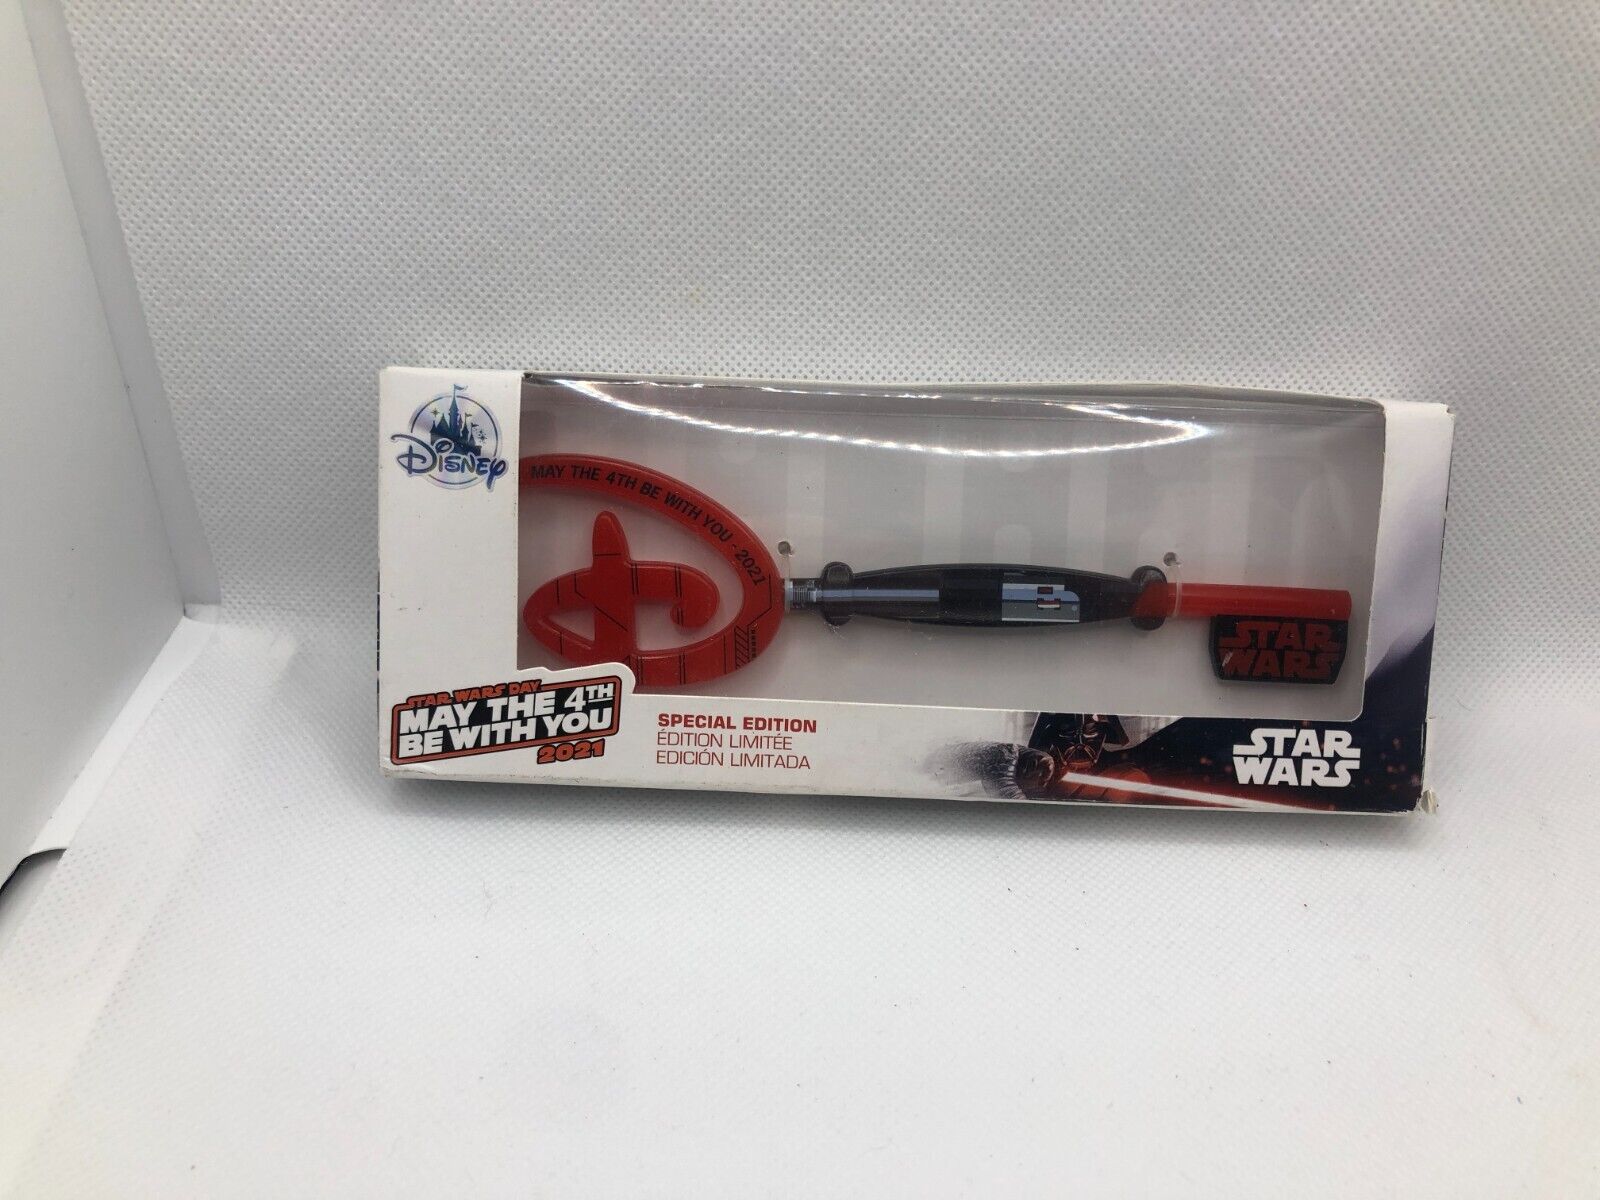 Disney Store Special Edition Key Star Wars May The 4th Be With You